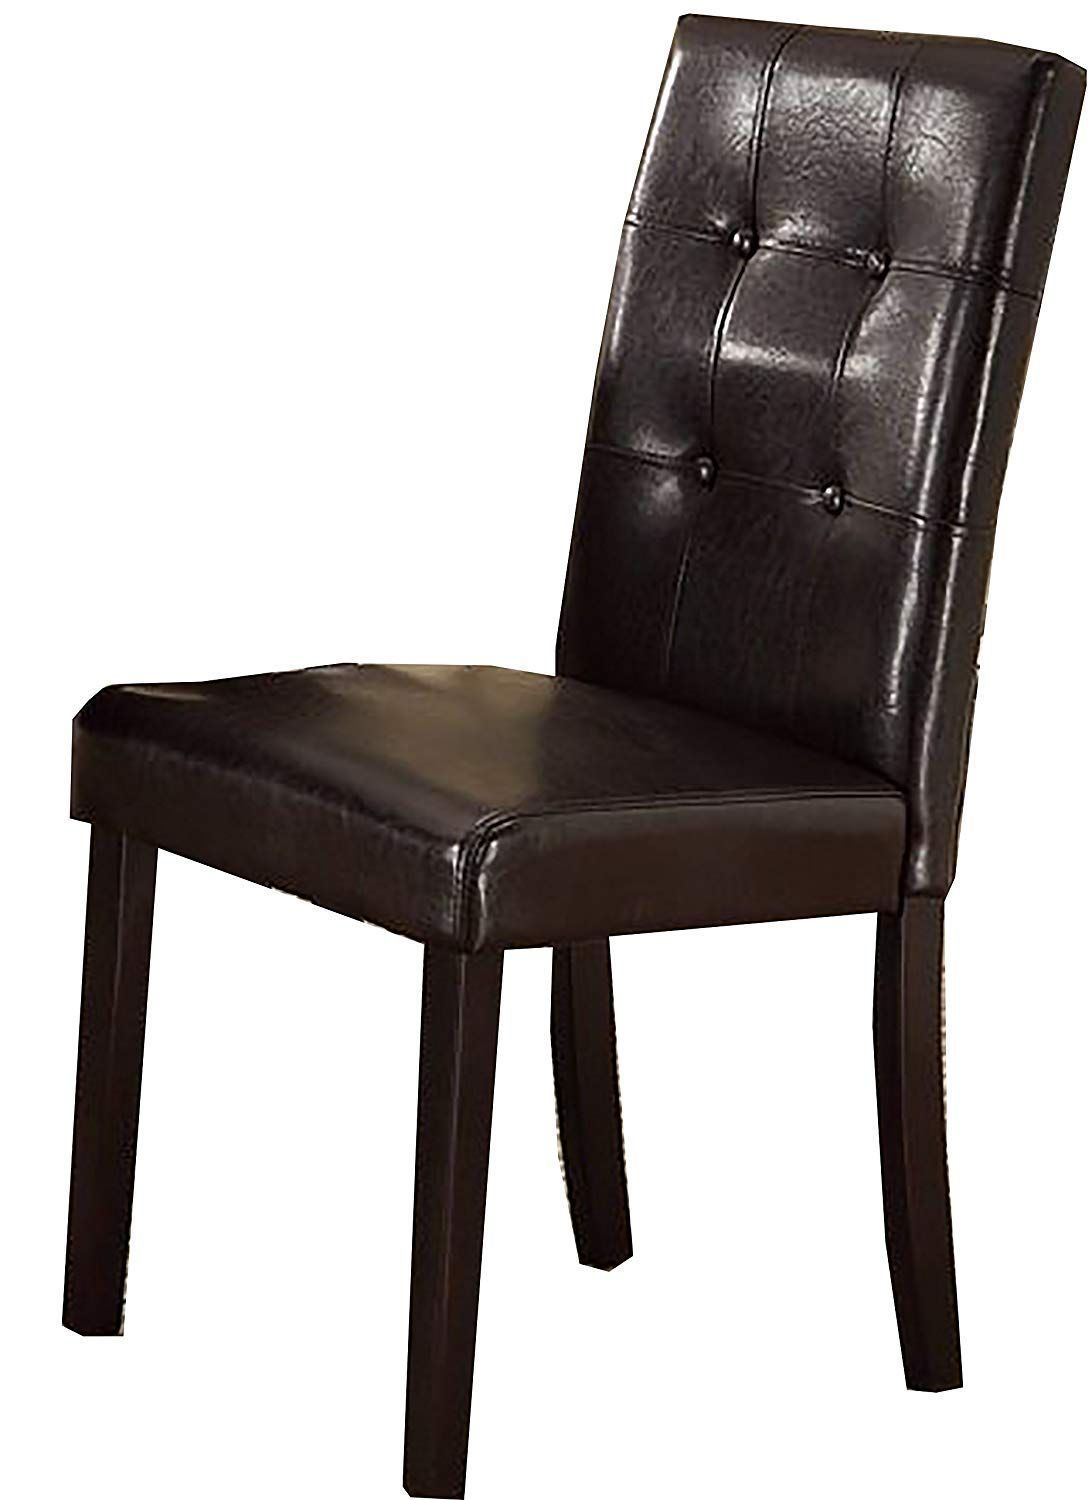 Set of 2pc Chairs Breakfast Dining Dark Brown PU / Faux Leather Tufted Upholstered Chair